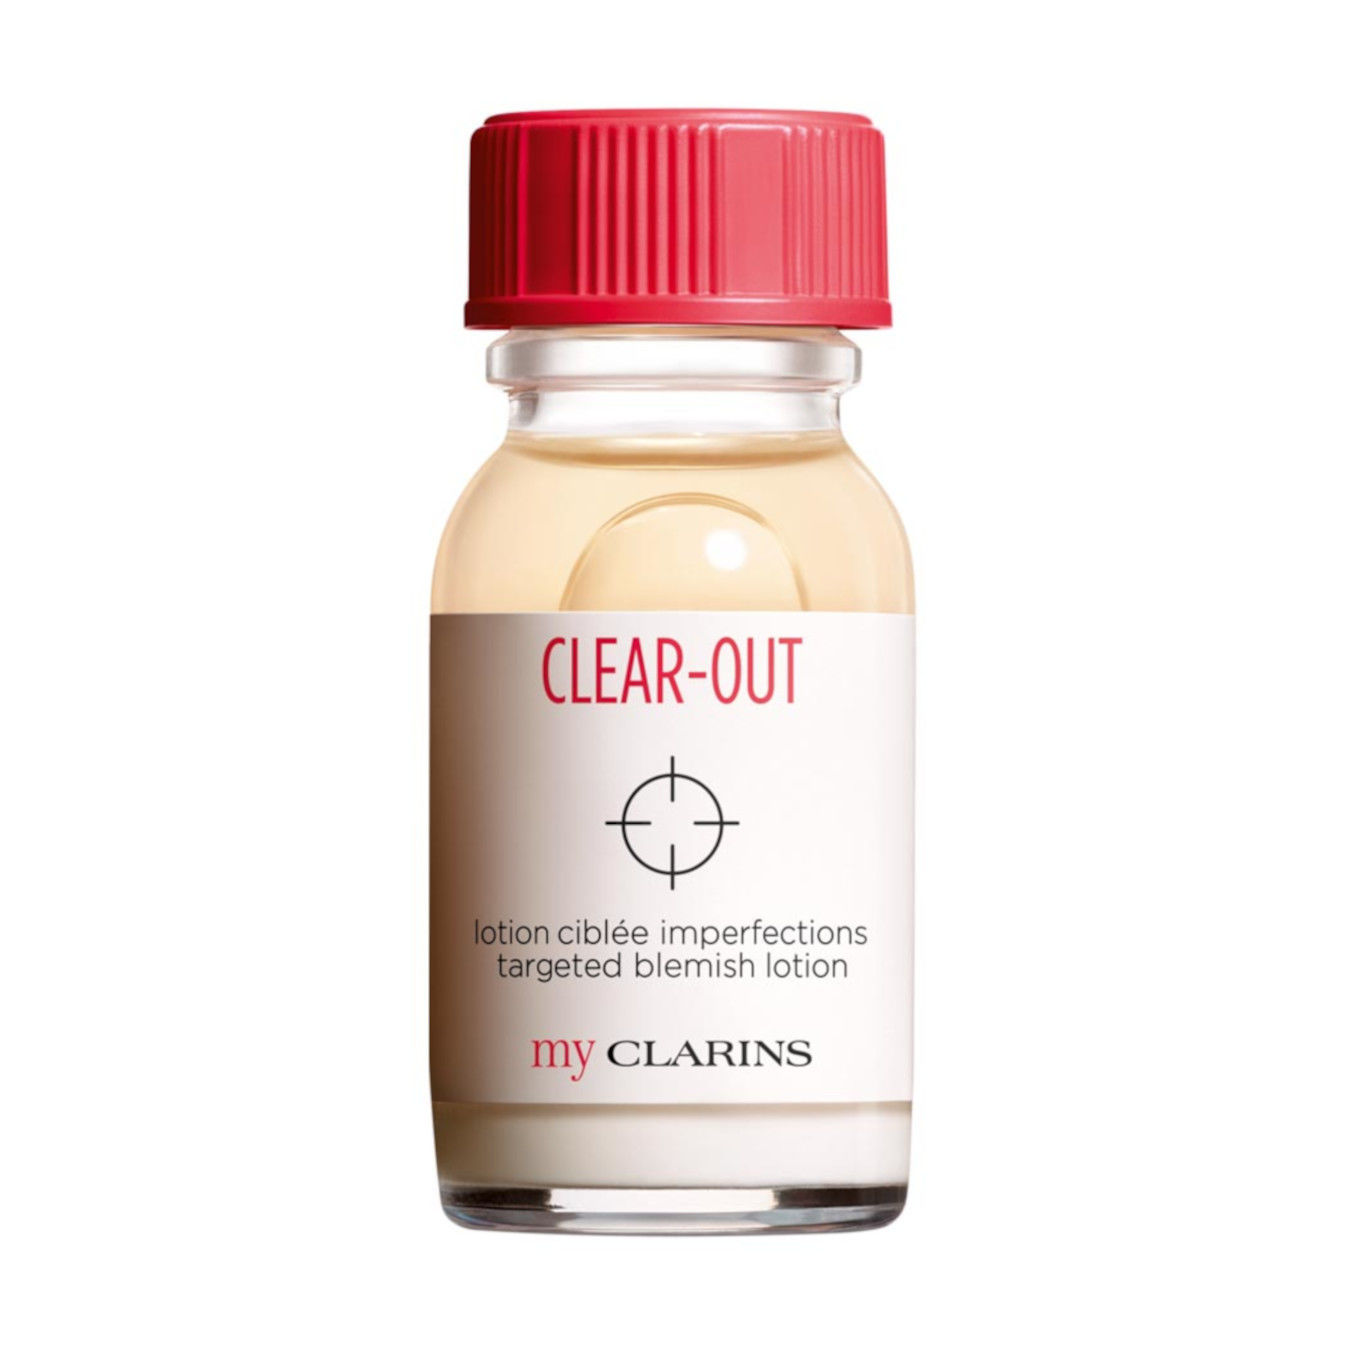 Clarins My Clarins Ciblee Imperfections Lotion von impo